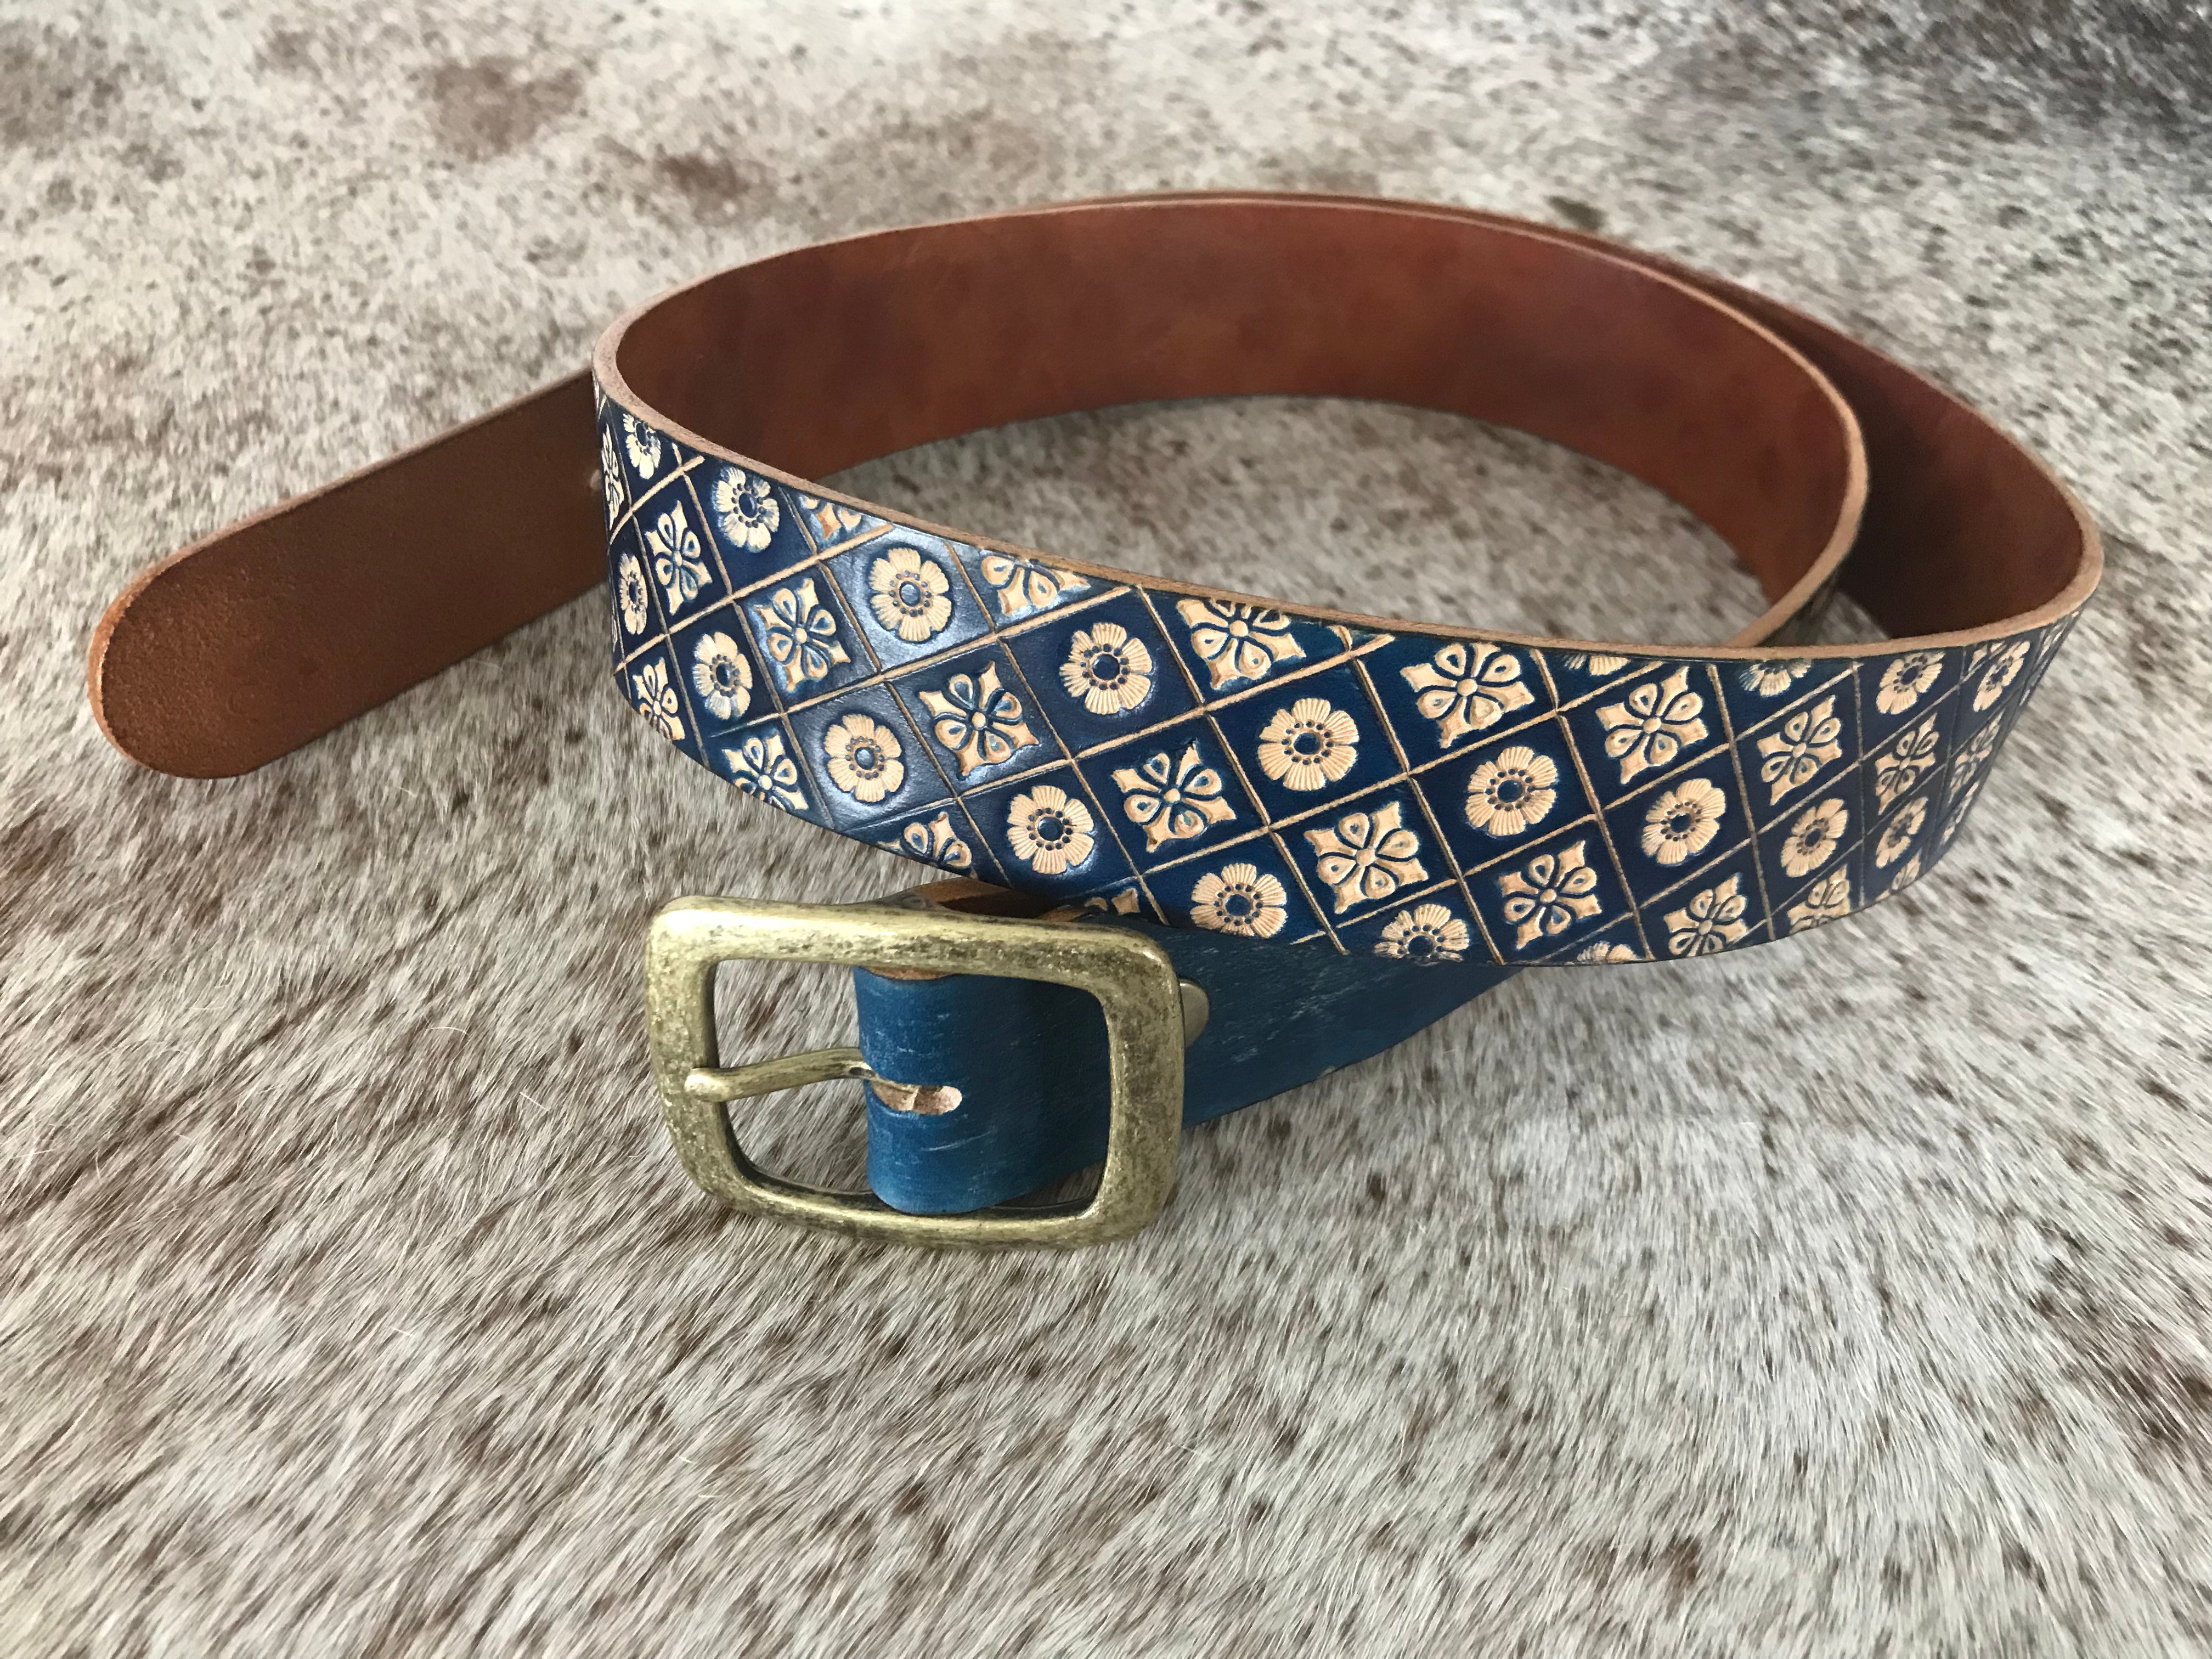 Louis Vuitton Mens Belts, Grey, Stock Confirmation Required 120 cm